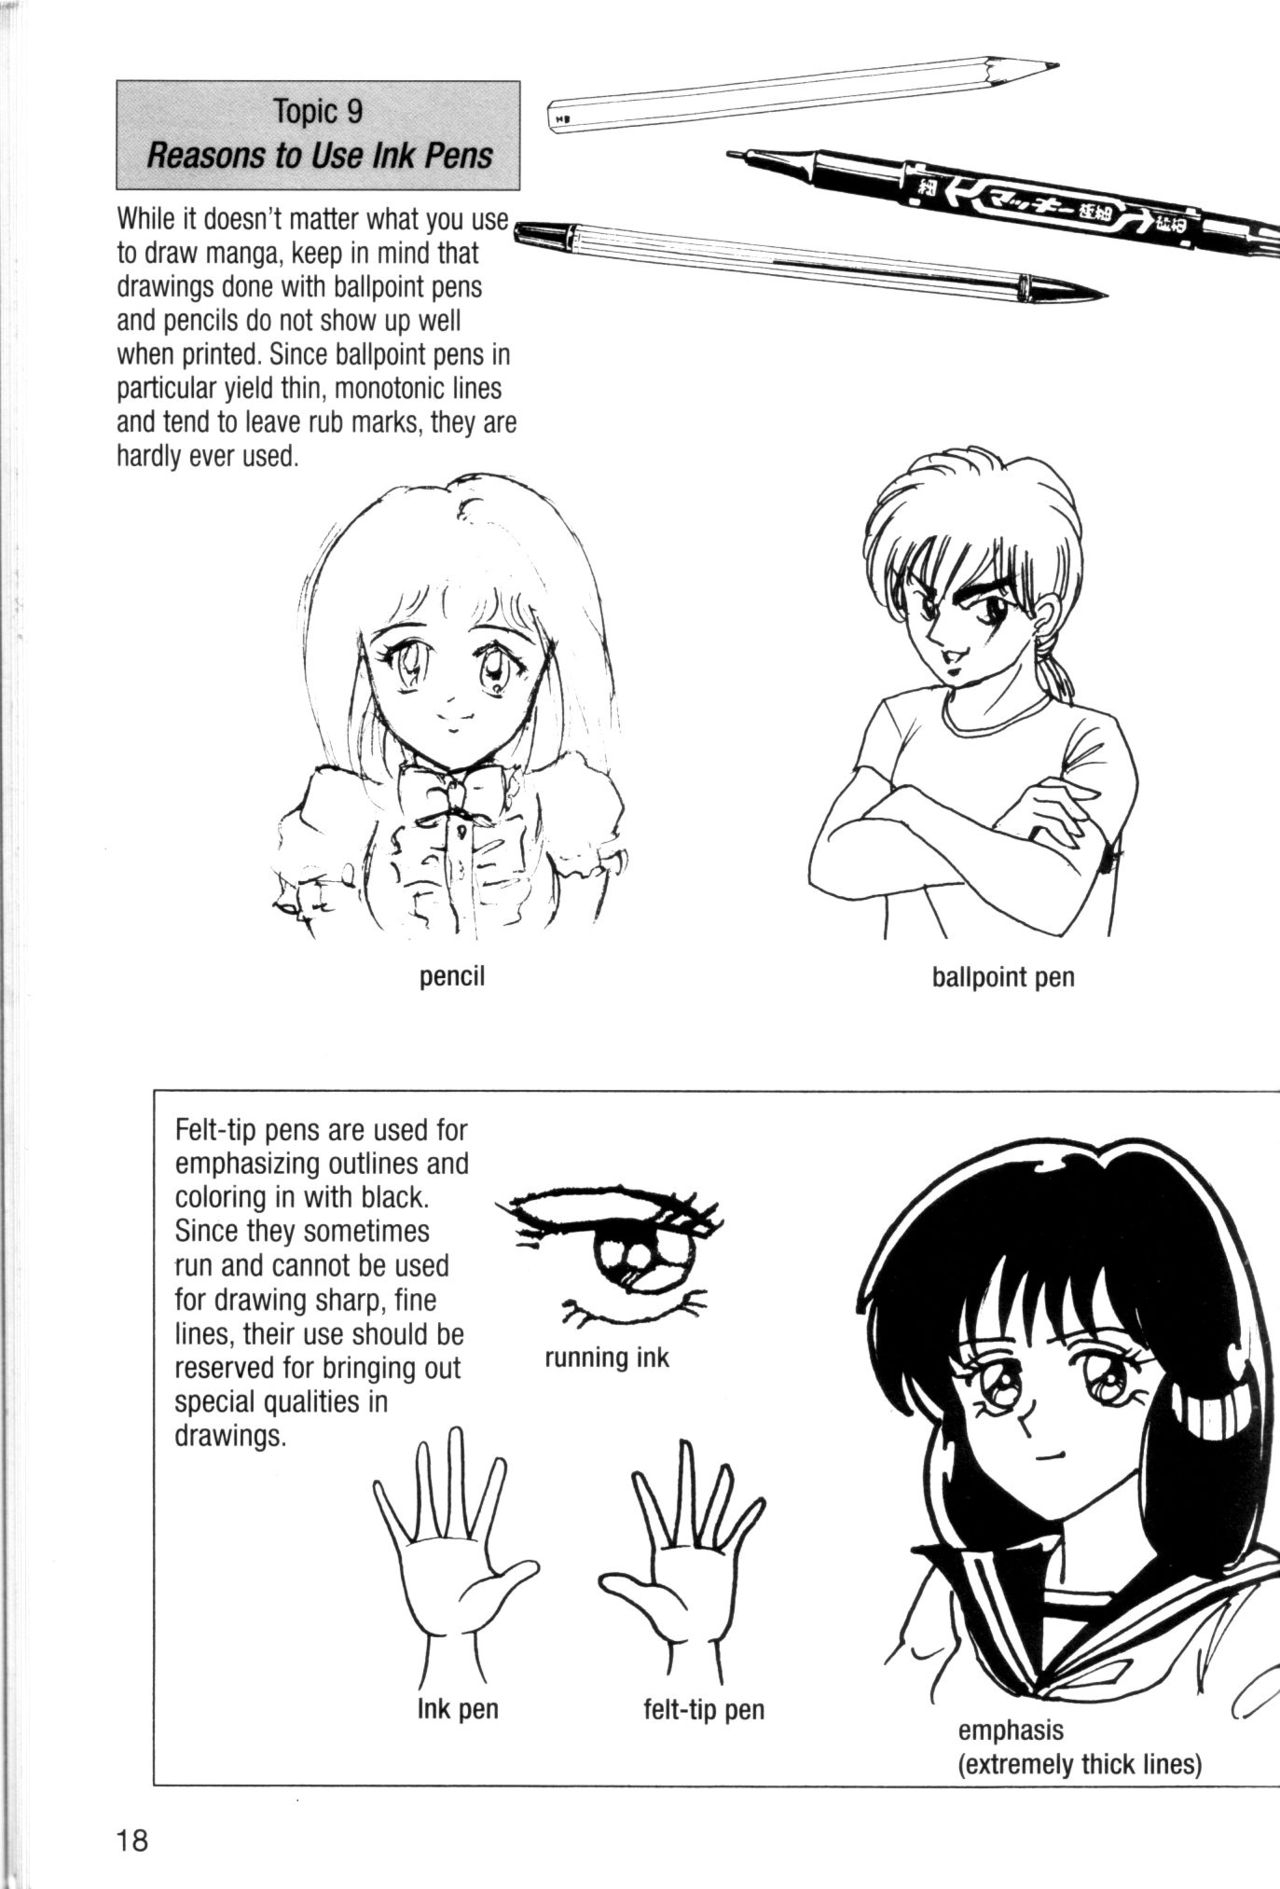 how to draw manga - getting started 16